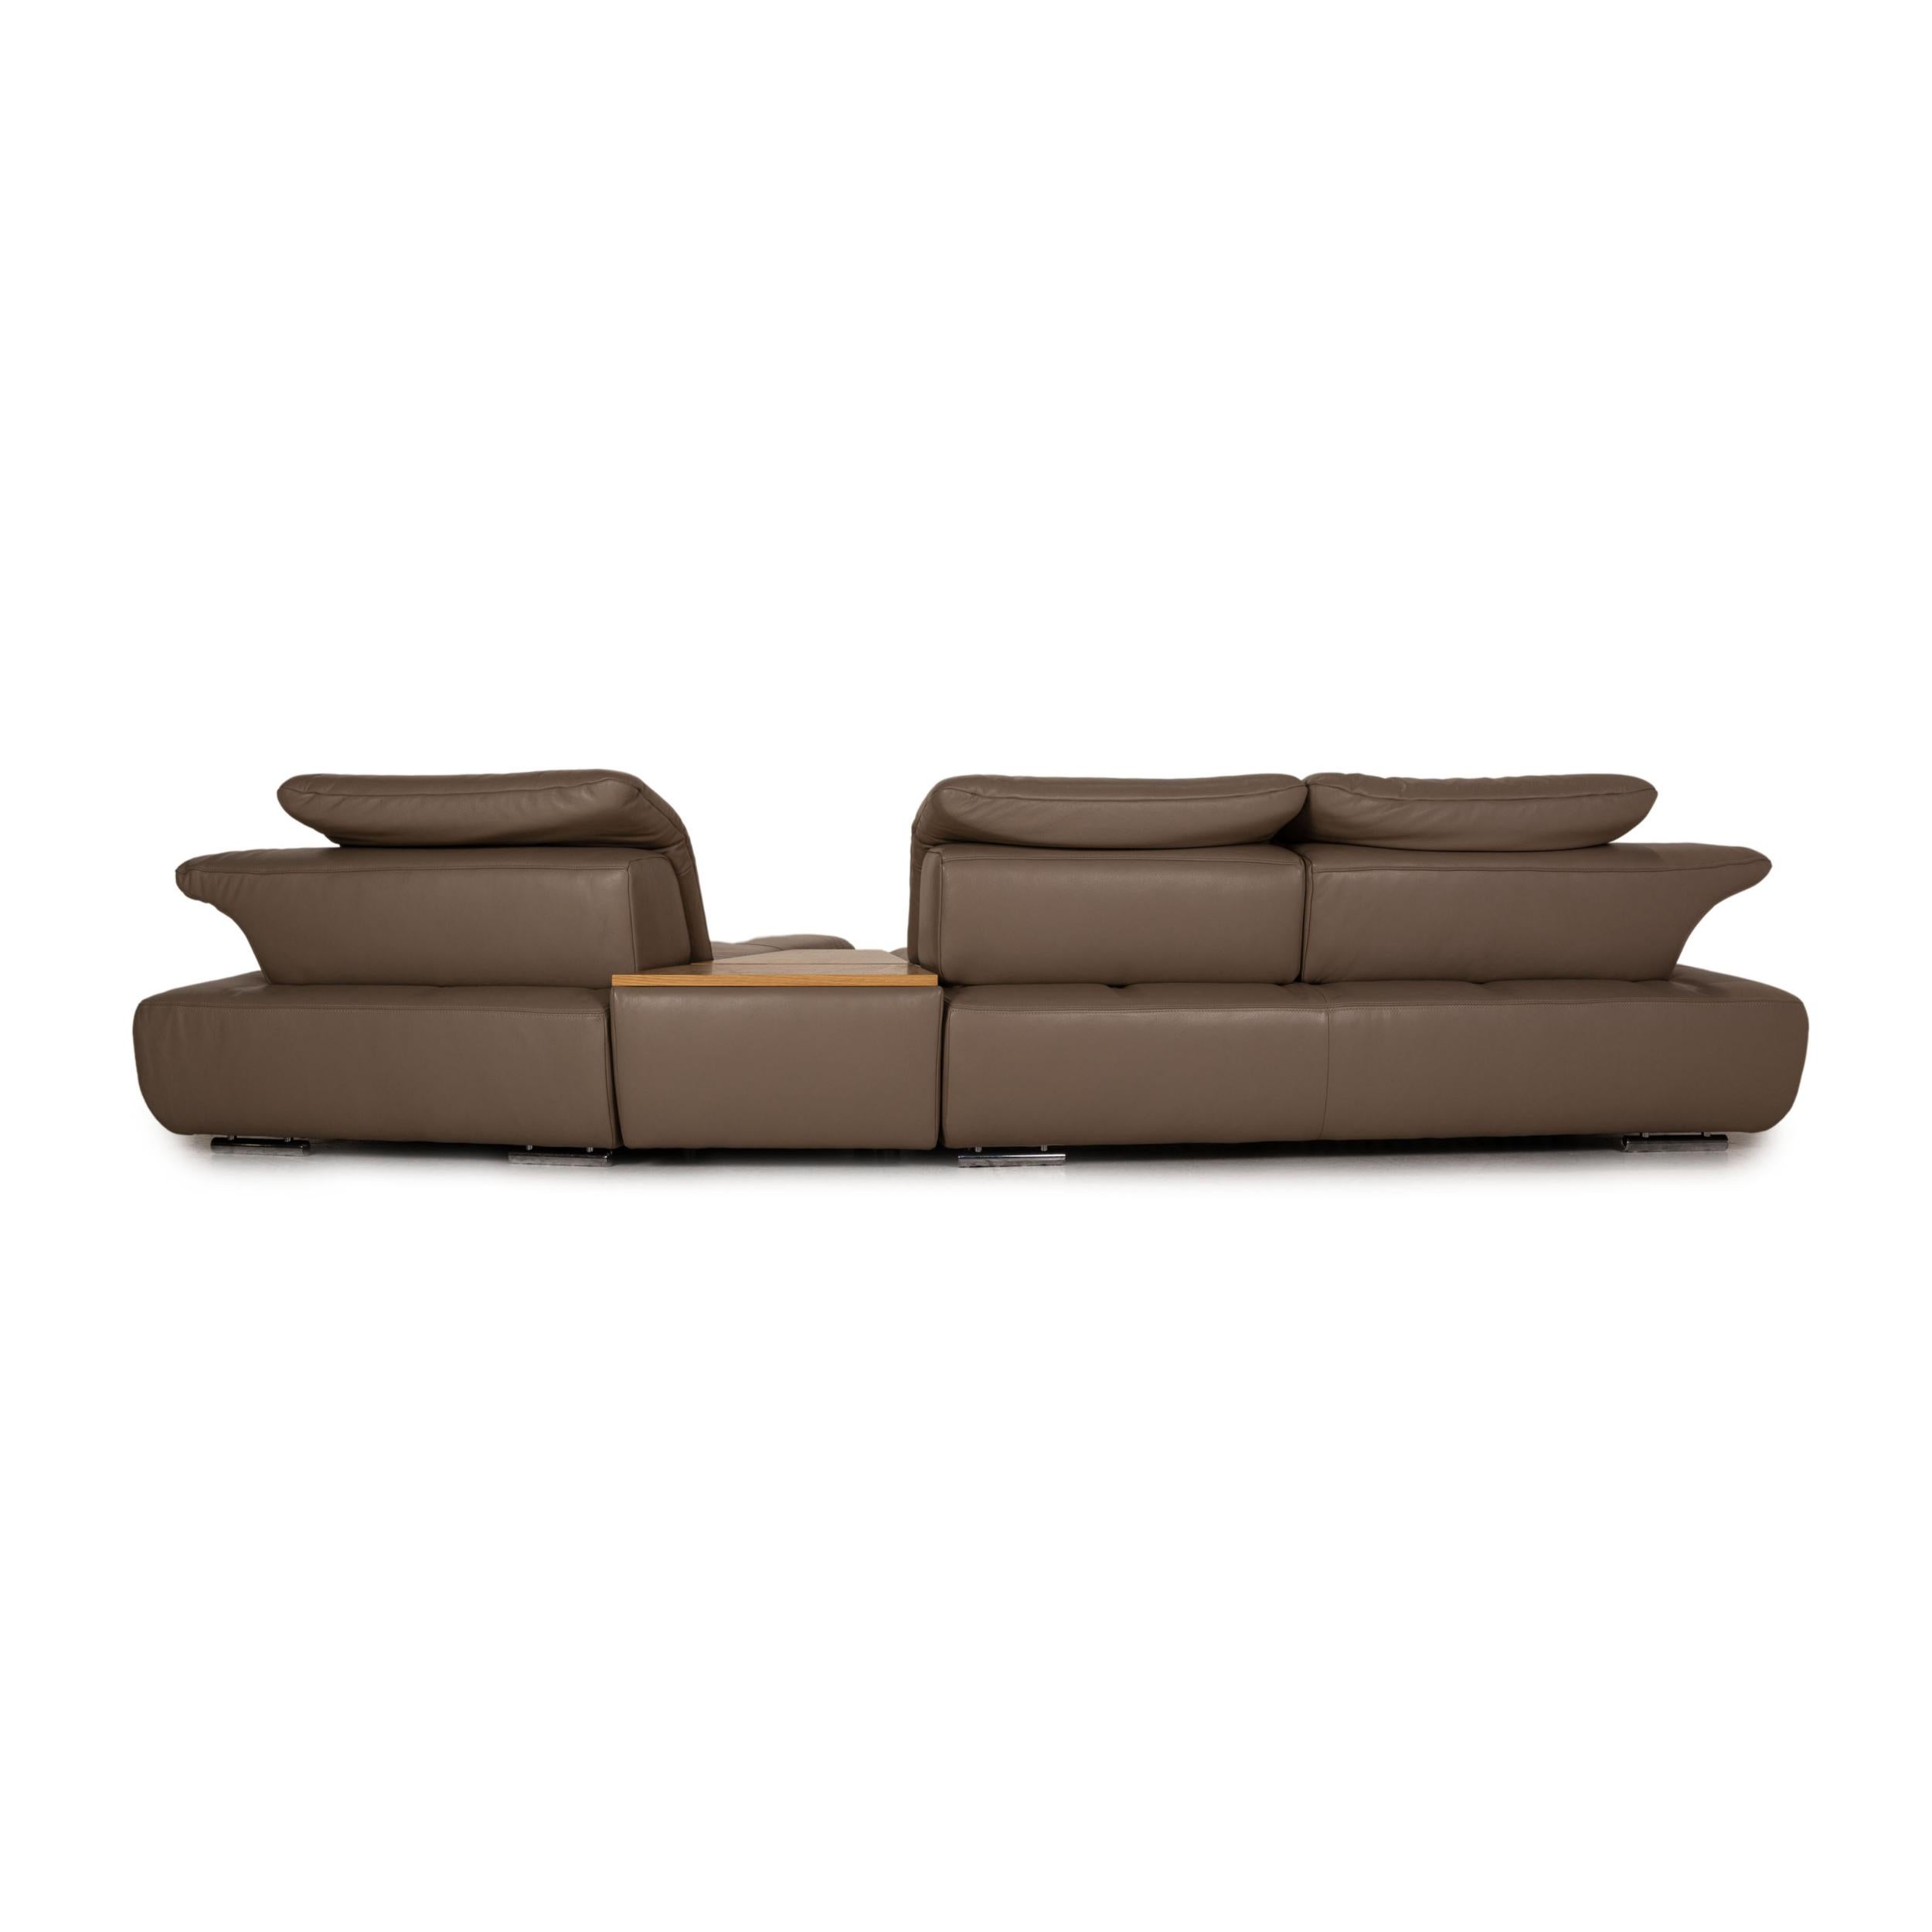 Koinor Avanti Leather Sofa Beige Corner Sofa Couch Function For Sale 2